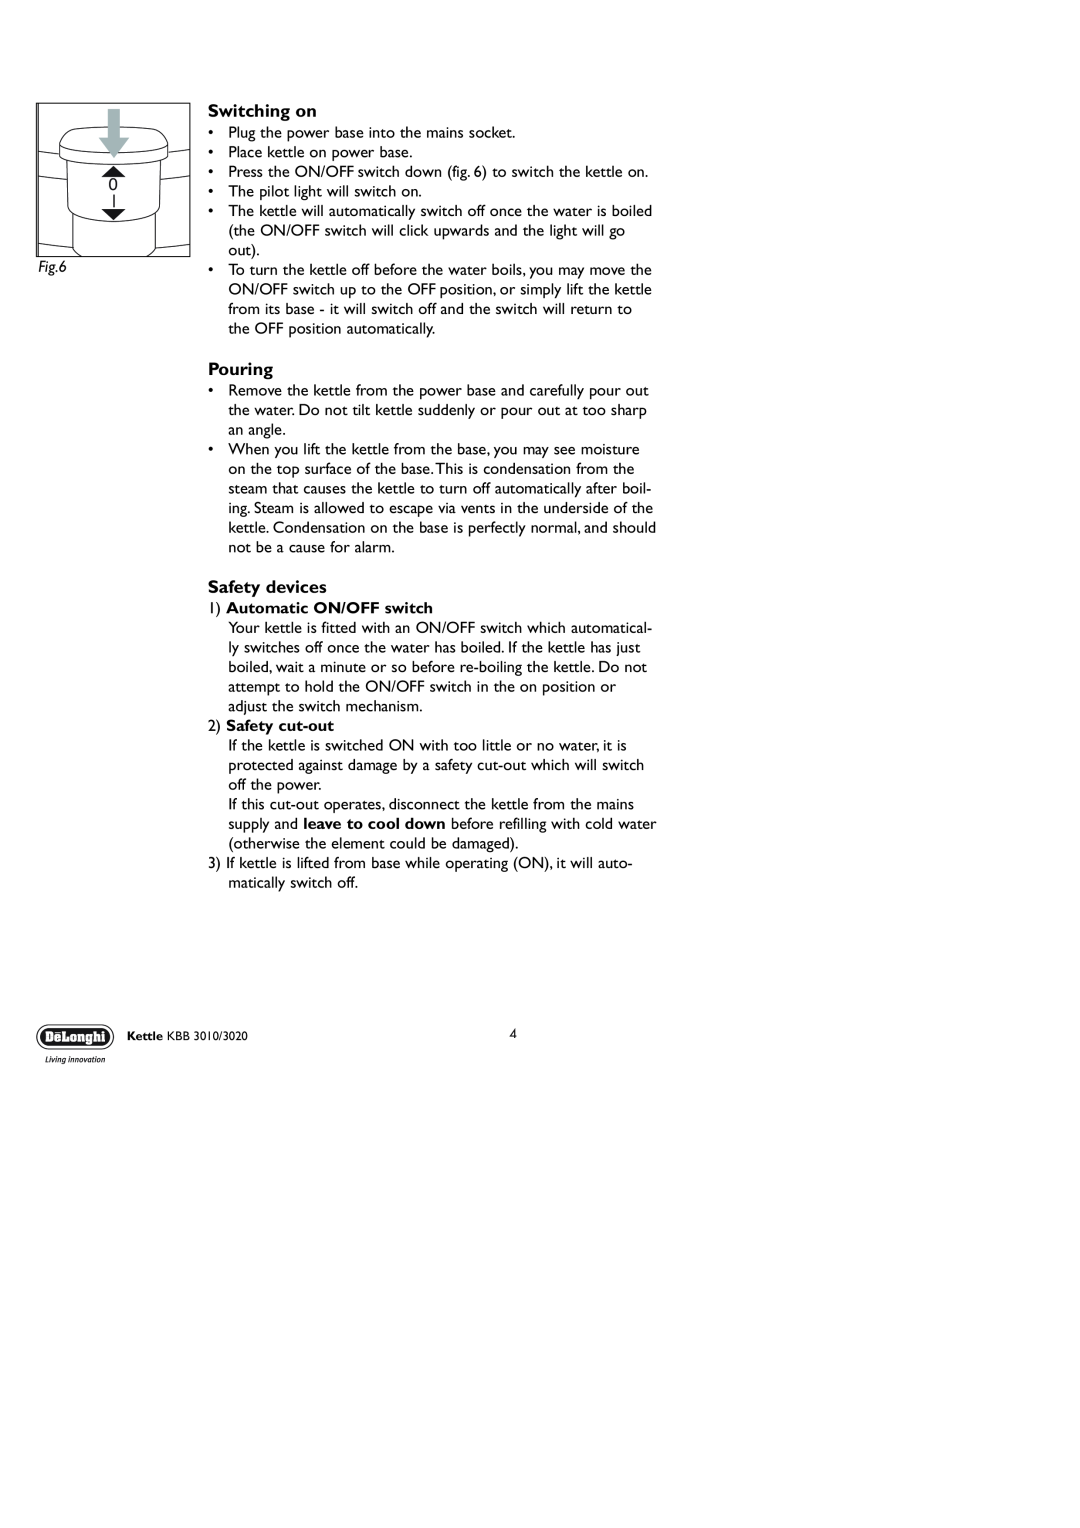 DeLonghi KBB 3010, KBB 3020 manual Switching on, Pouring, Safety devices, 1Automatic ON/OFF switch, 2Safety cut-out 